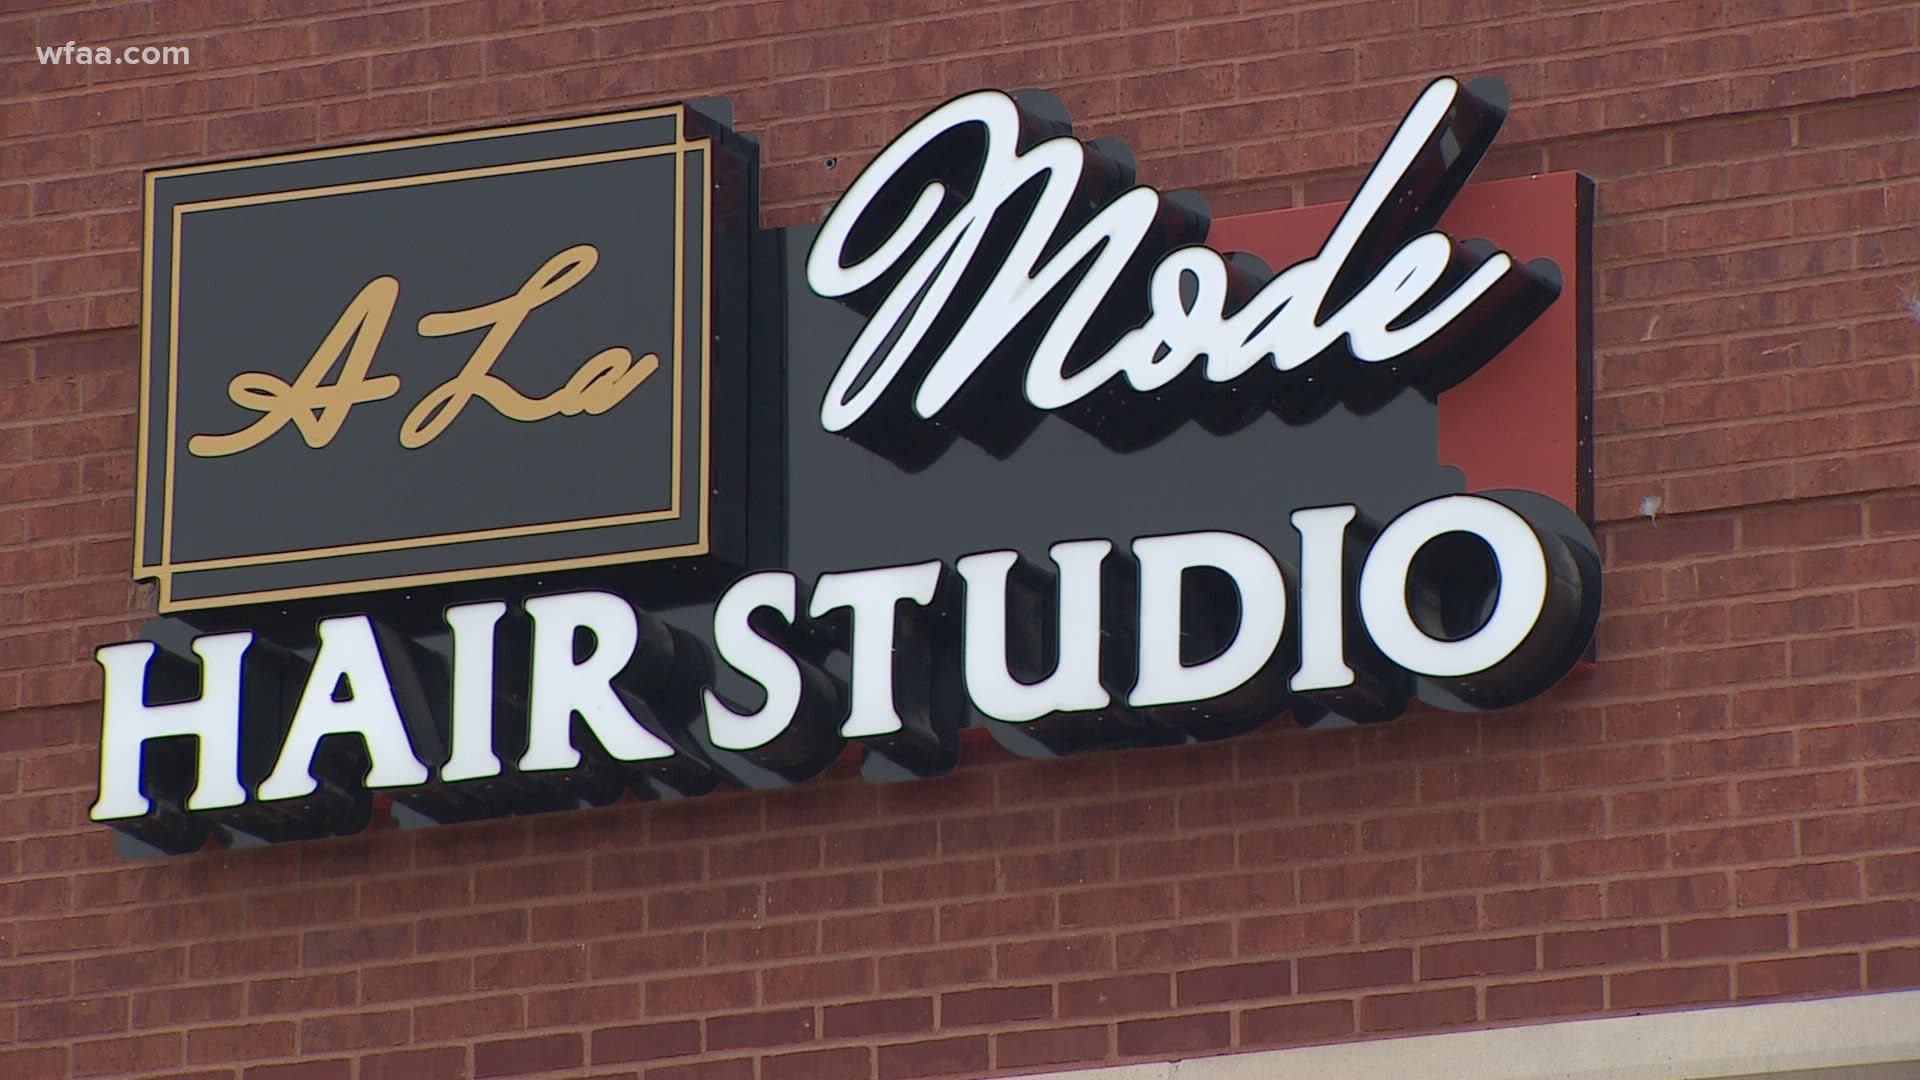 The owners of A La Mode Hair Studio in Plano are trying to clear the air after receiving about 90 voicemails.